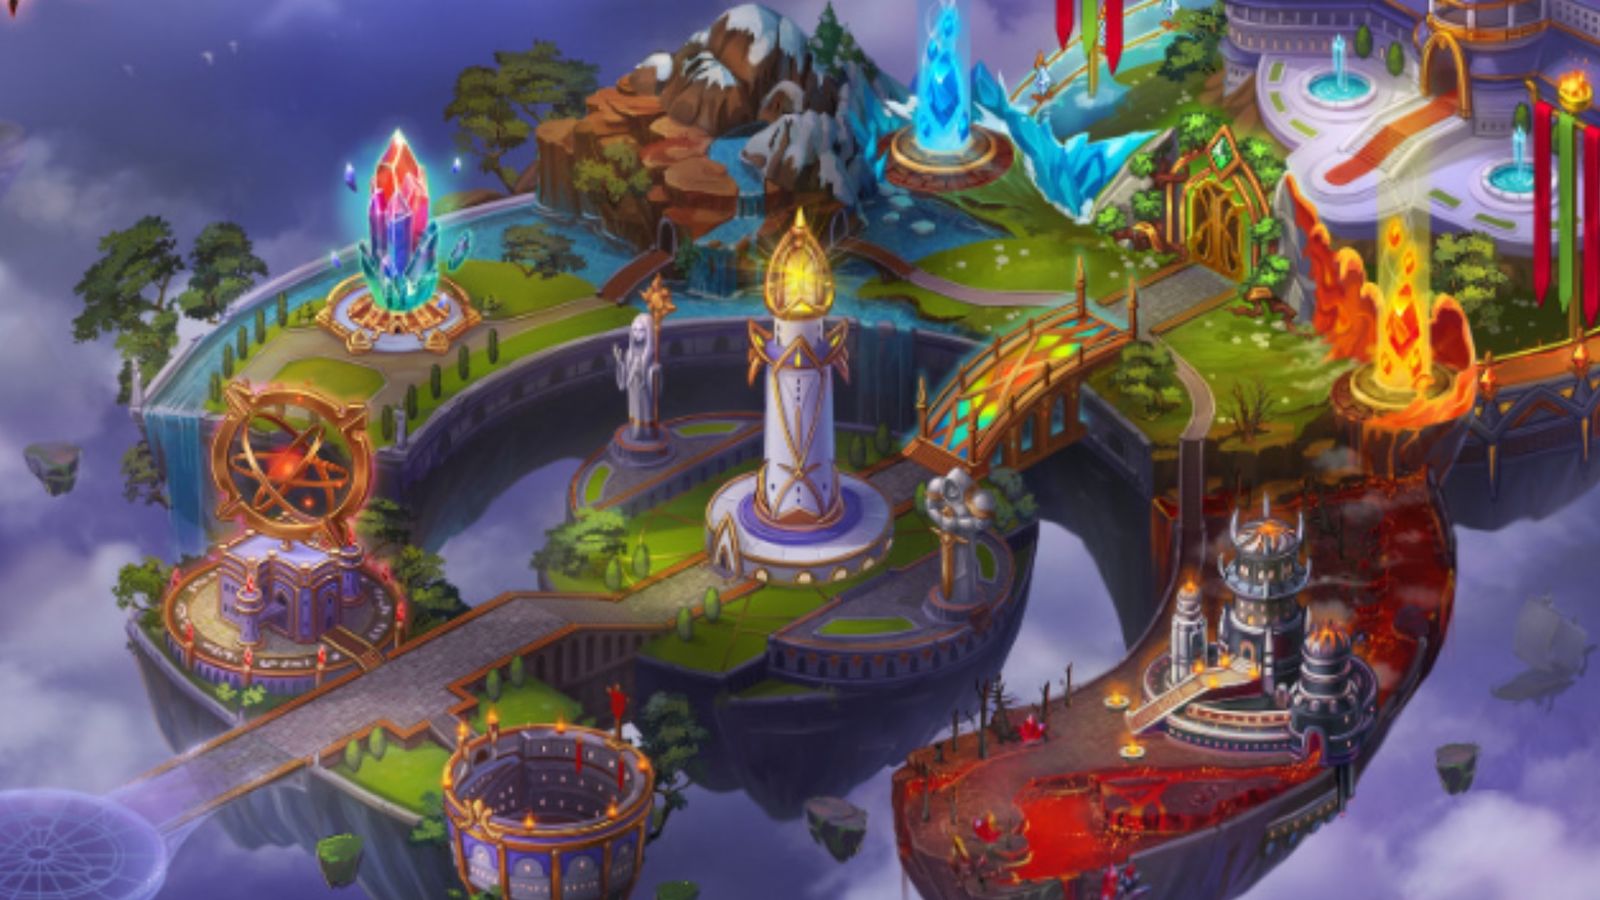 Screenshot from Hero Wars, showing a lavish palace within the sky